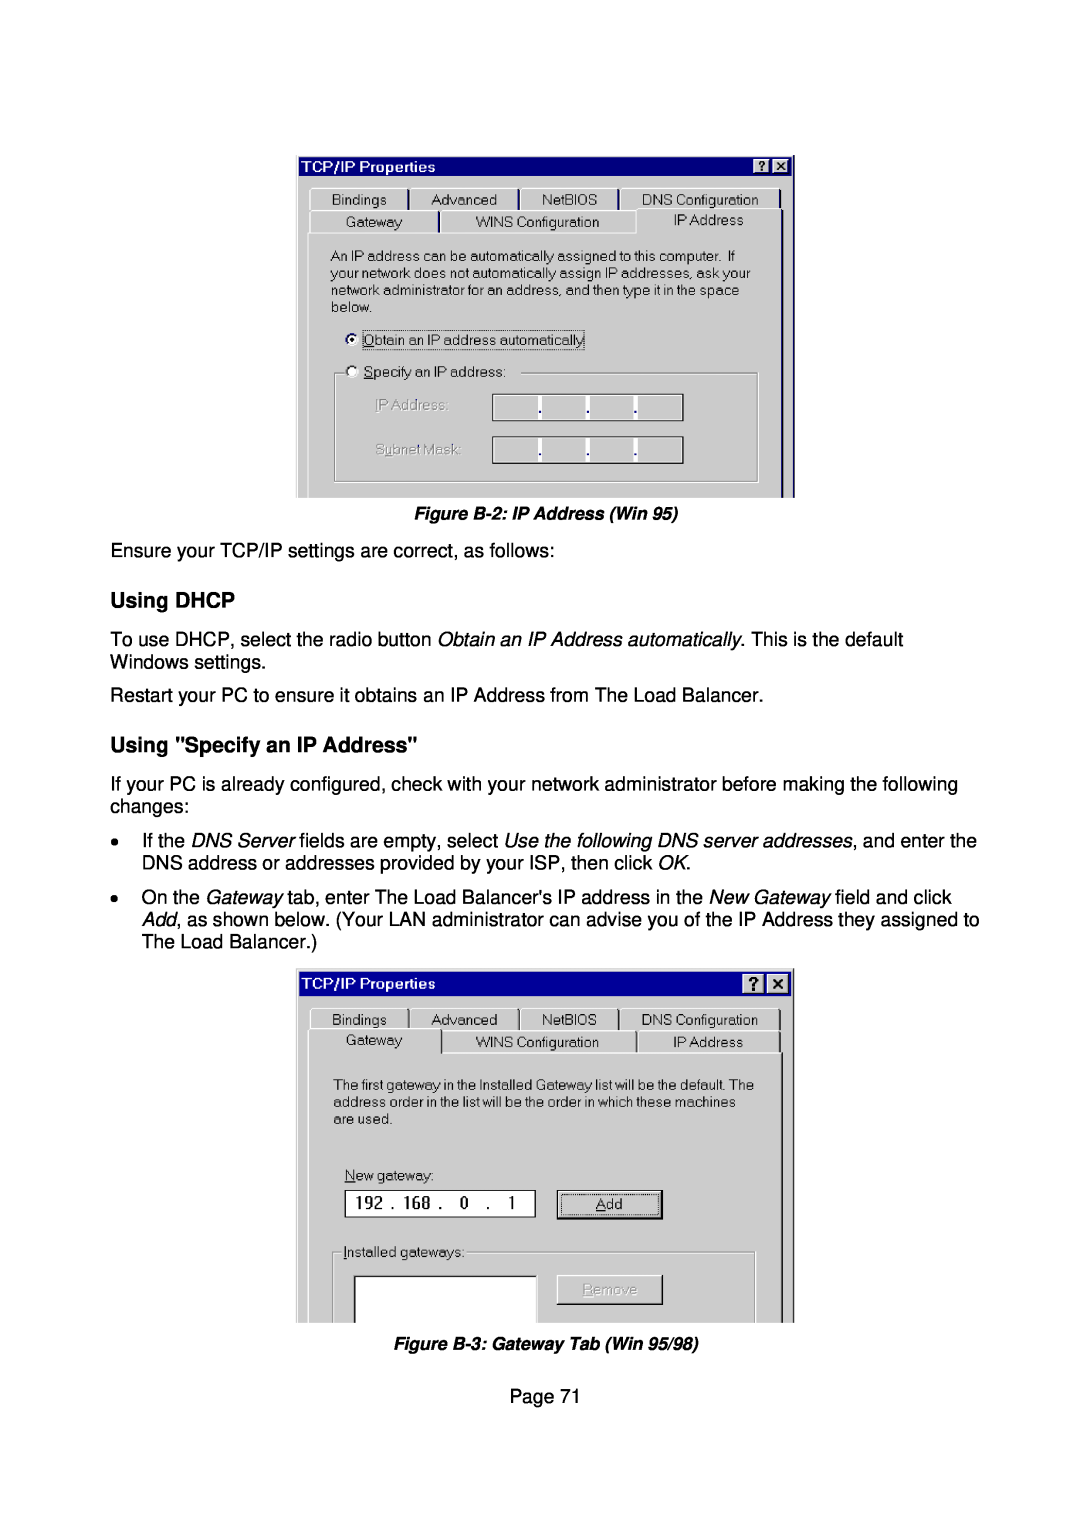 Edimax Technology Edimax user guide Router manual Using DHCP, Using Specify an IP Address, Figure B-2 IP Address Win 